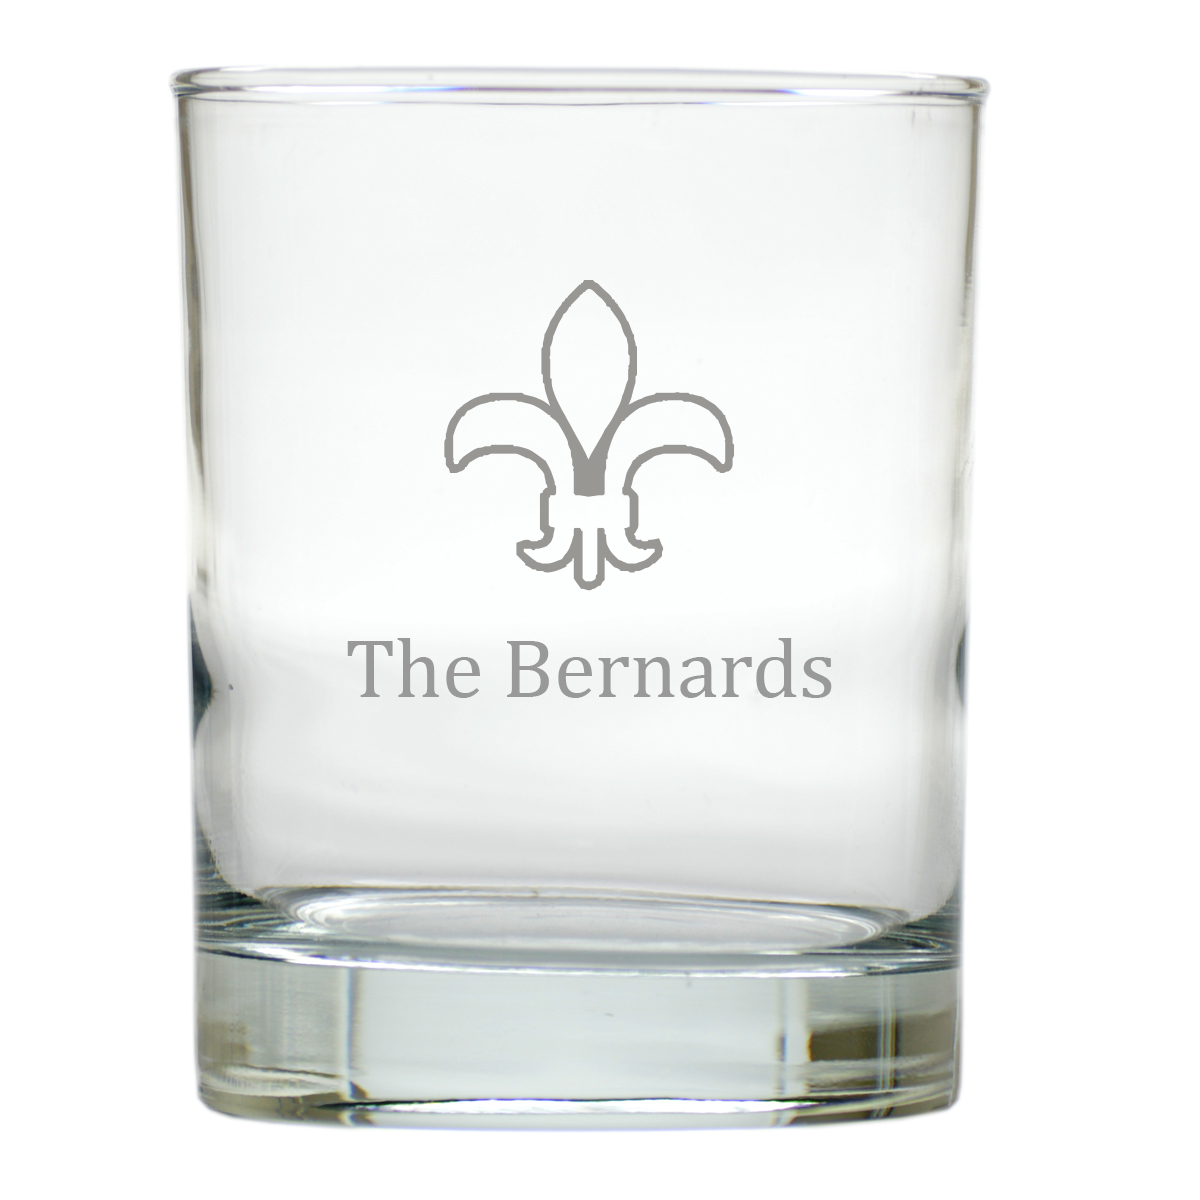 https://cdn7.bigcommerce.com/s-zts5l/images/stencil/1280x1280/products/5265/3454/personalized-fluer-de-lis-old-fashioned-set-of-6-glass-5__88786.1515182869.jpg?c=2&imbypass=on&imbypass=on